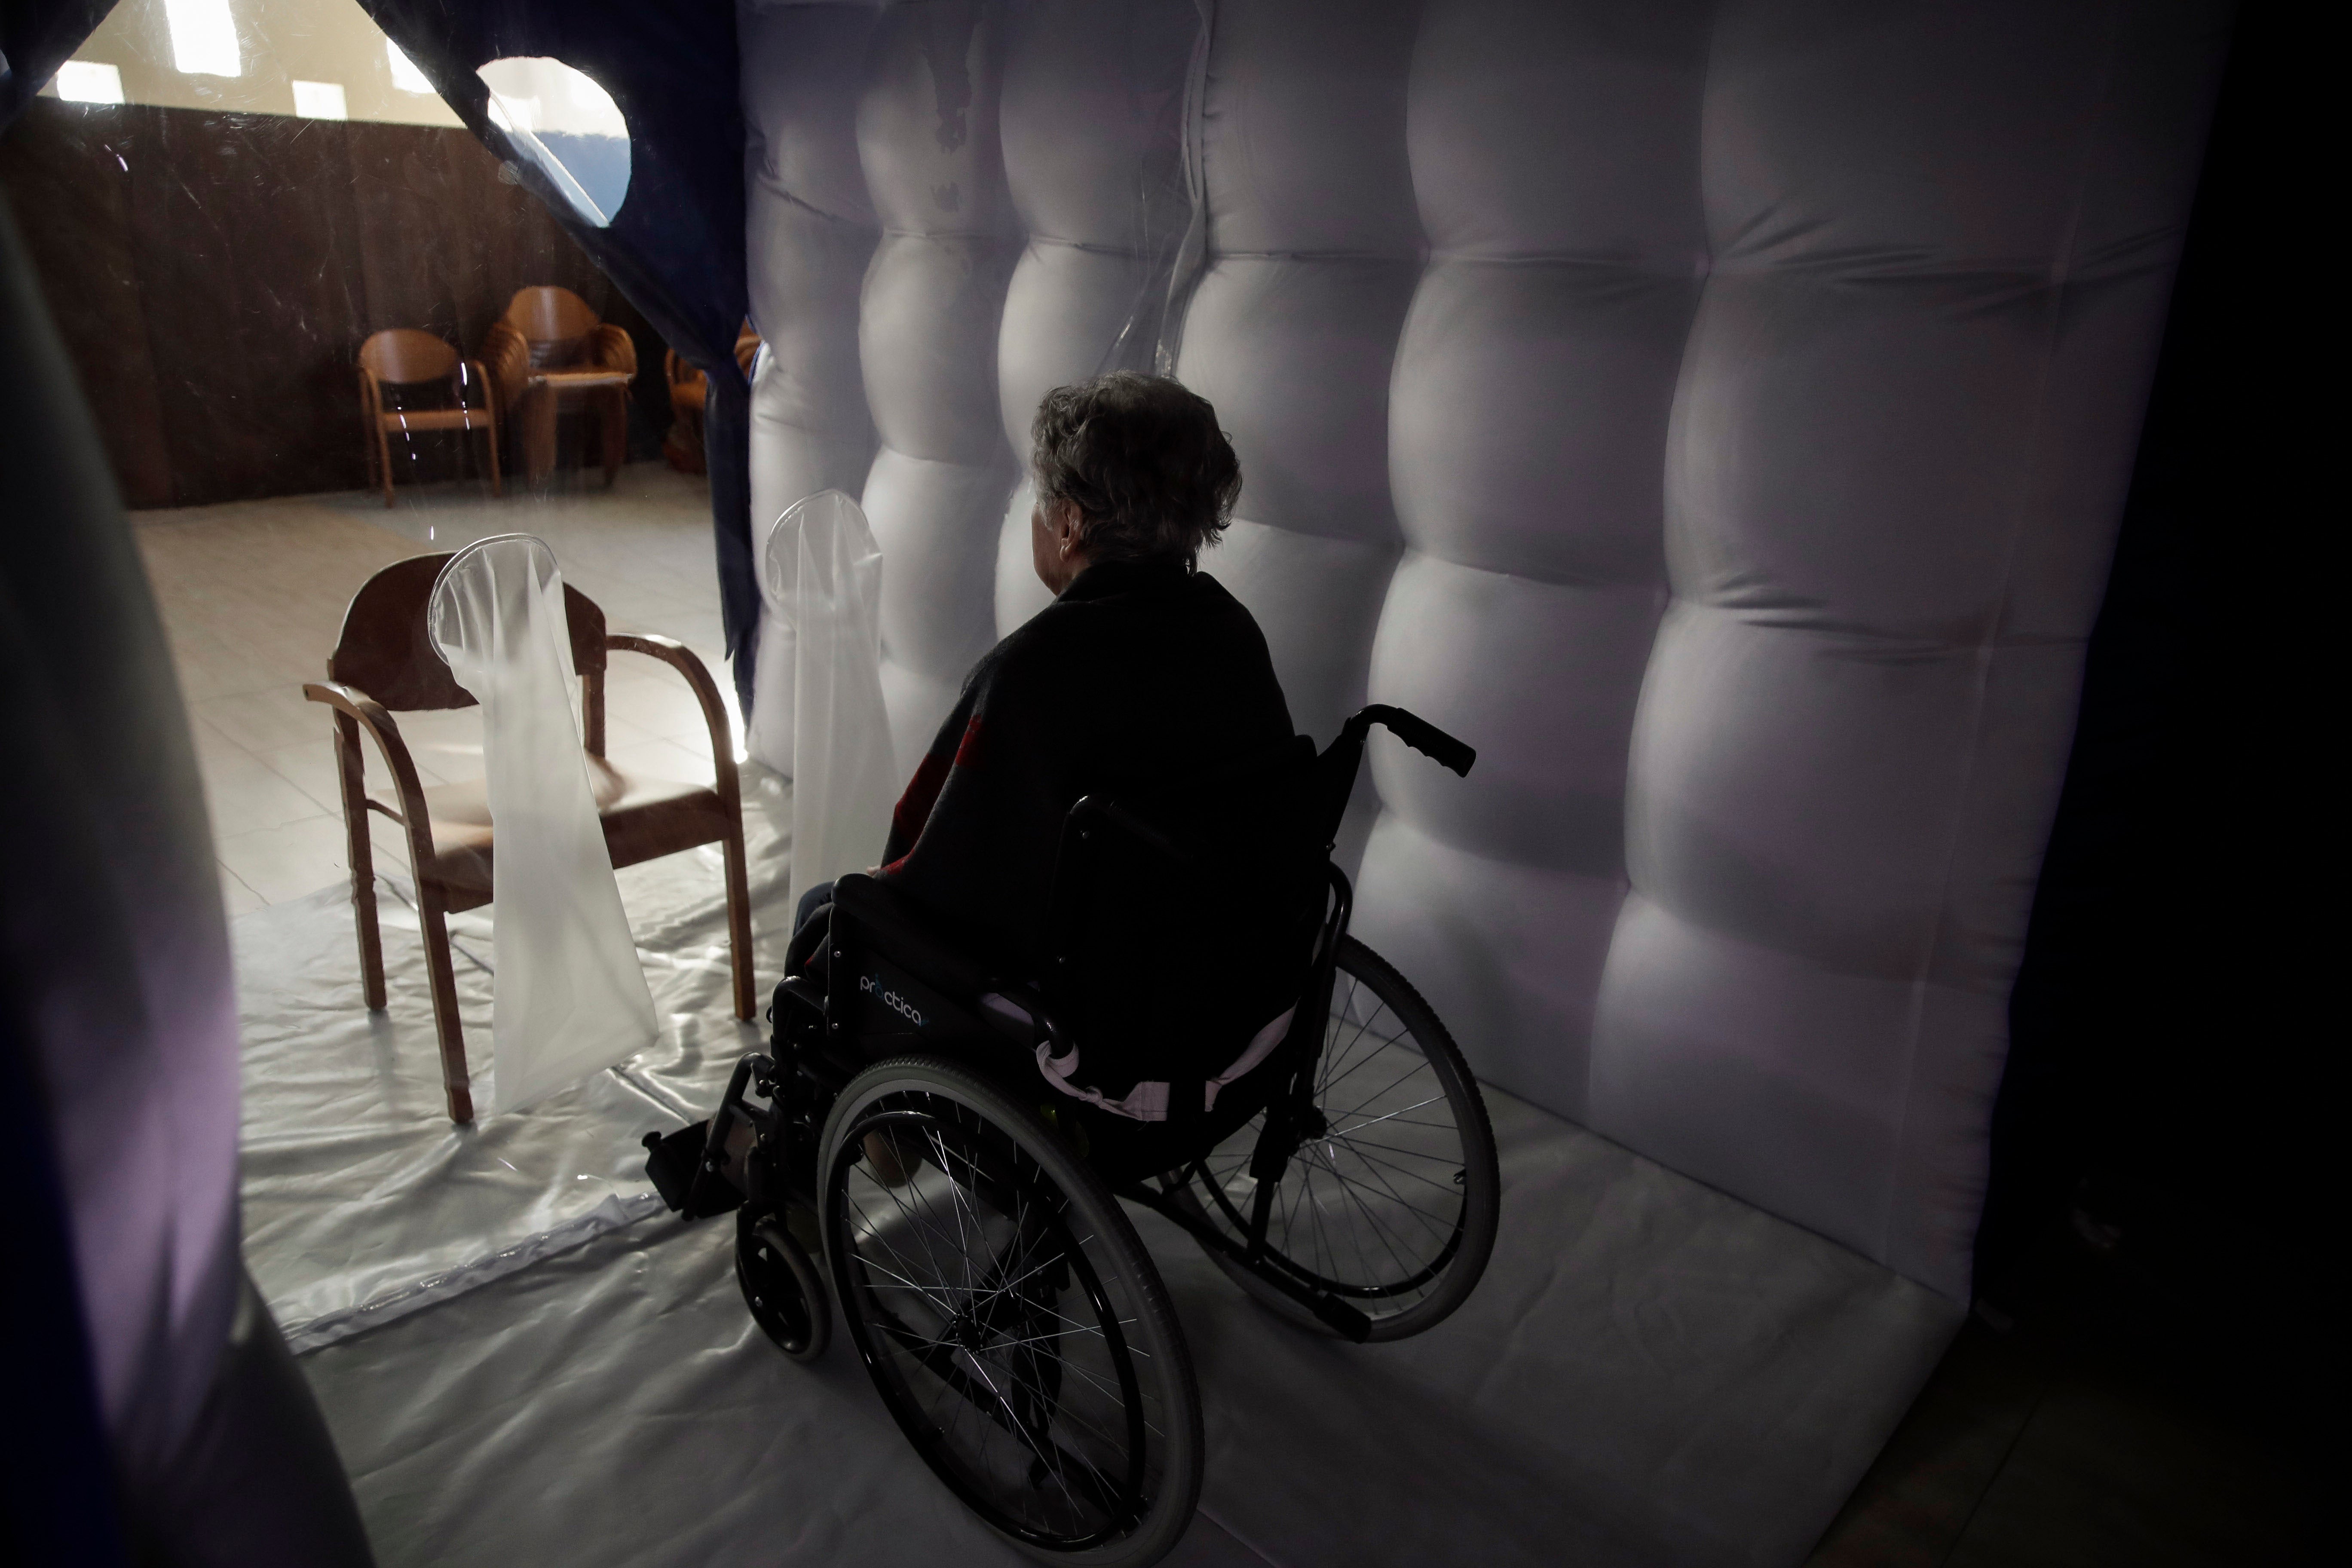 Caterina Salvi, 90, waits for a visitor inside a protective inflatable plastic tunnel at the Martino Zanchi nursing home in Alzano Lombardo, northern Italy, February 24, 2021. 